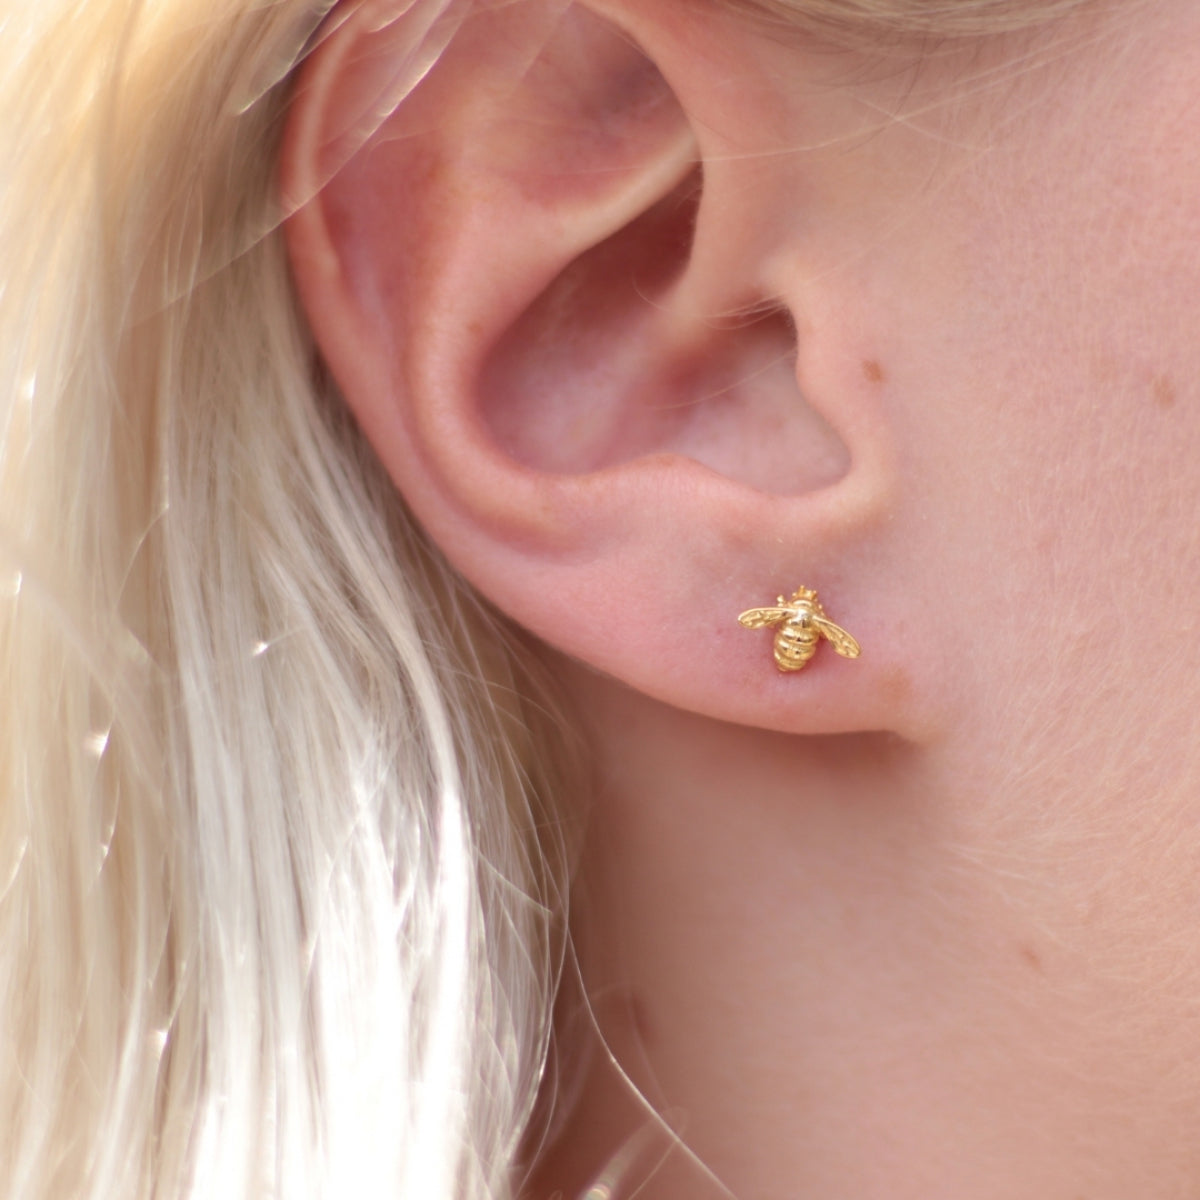 Bumble Bee Stud Earring - 925 Silver, Gold